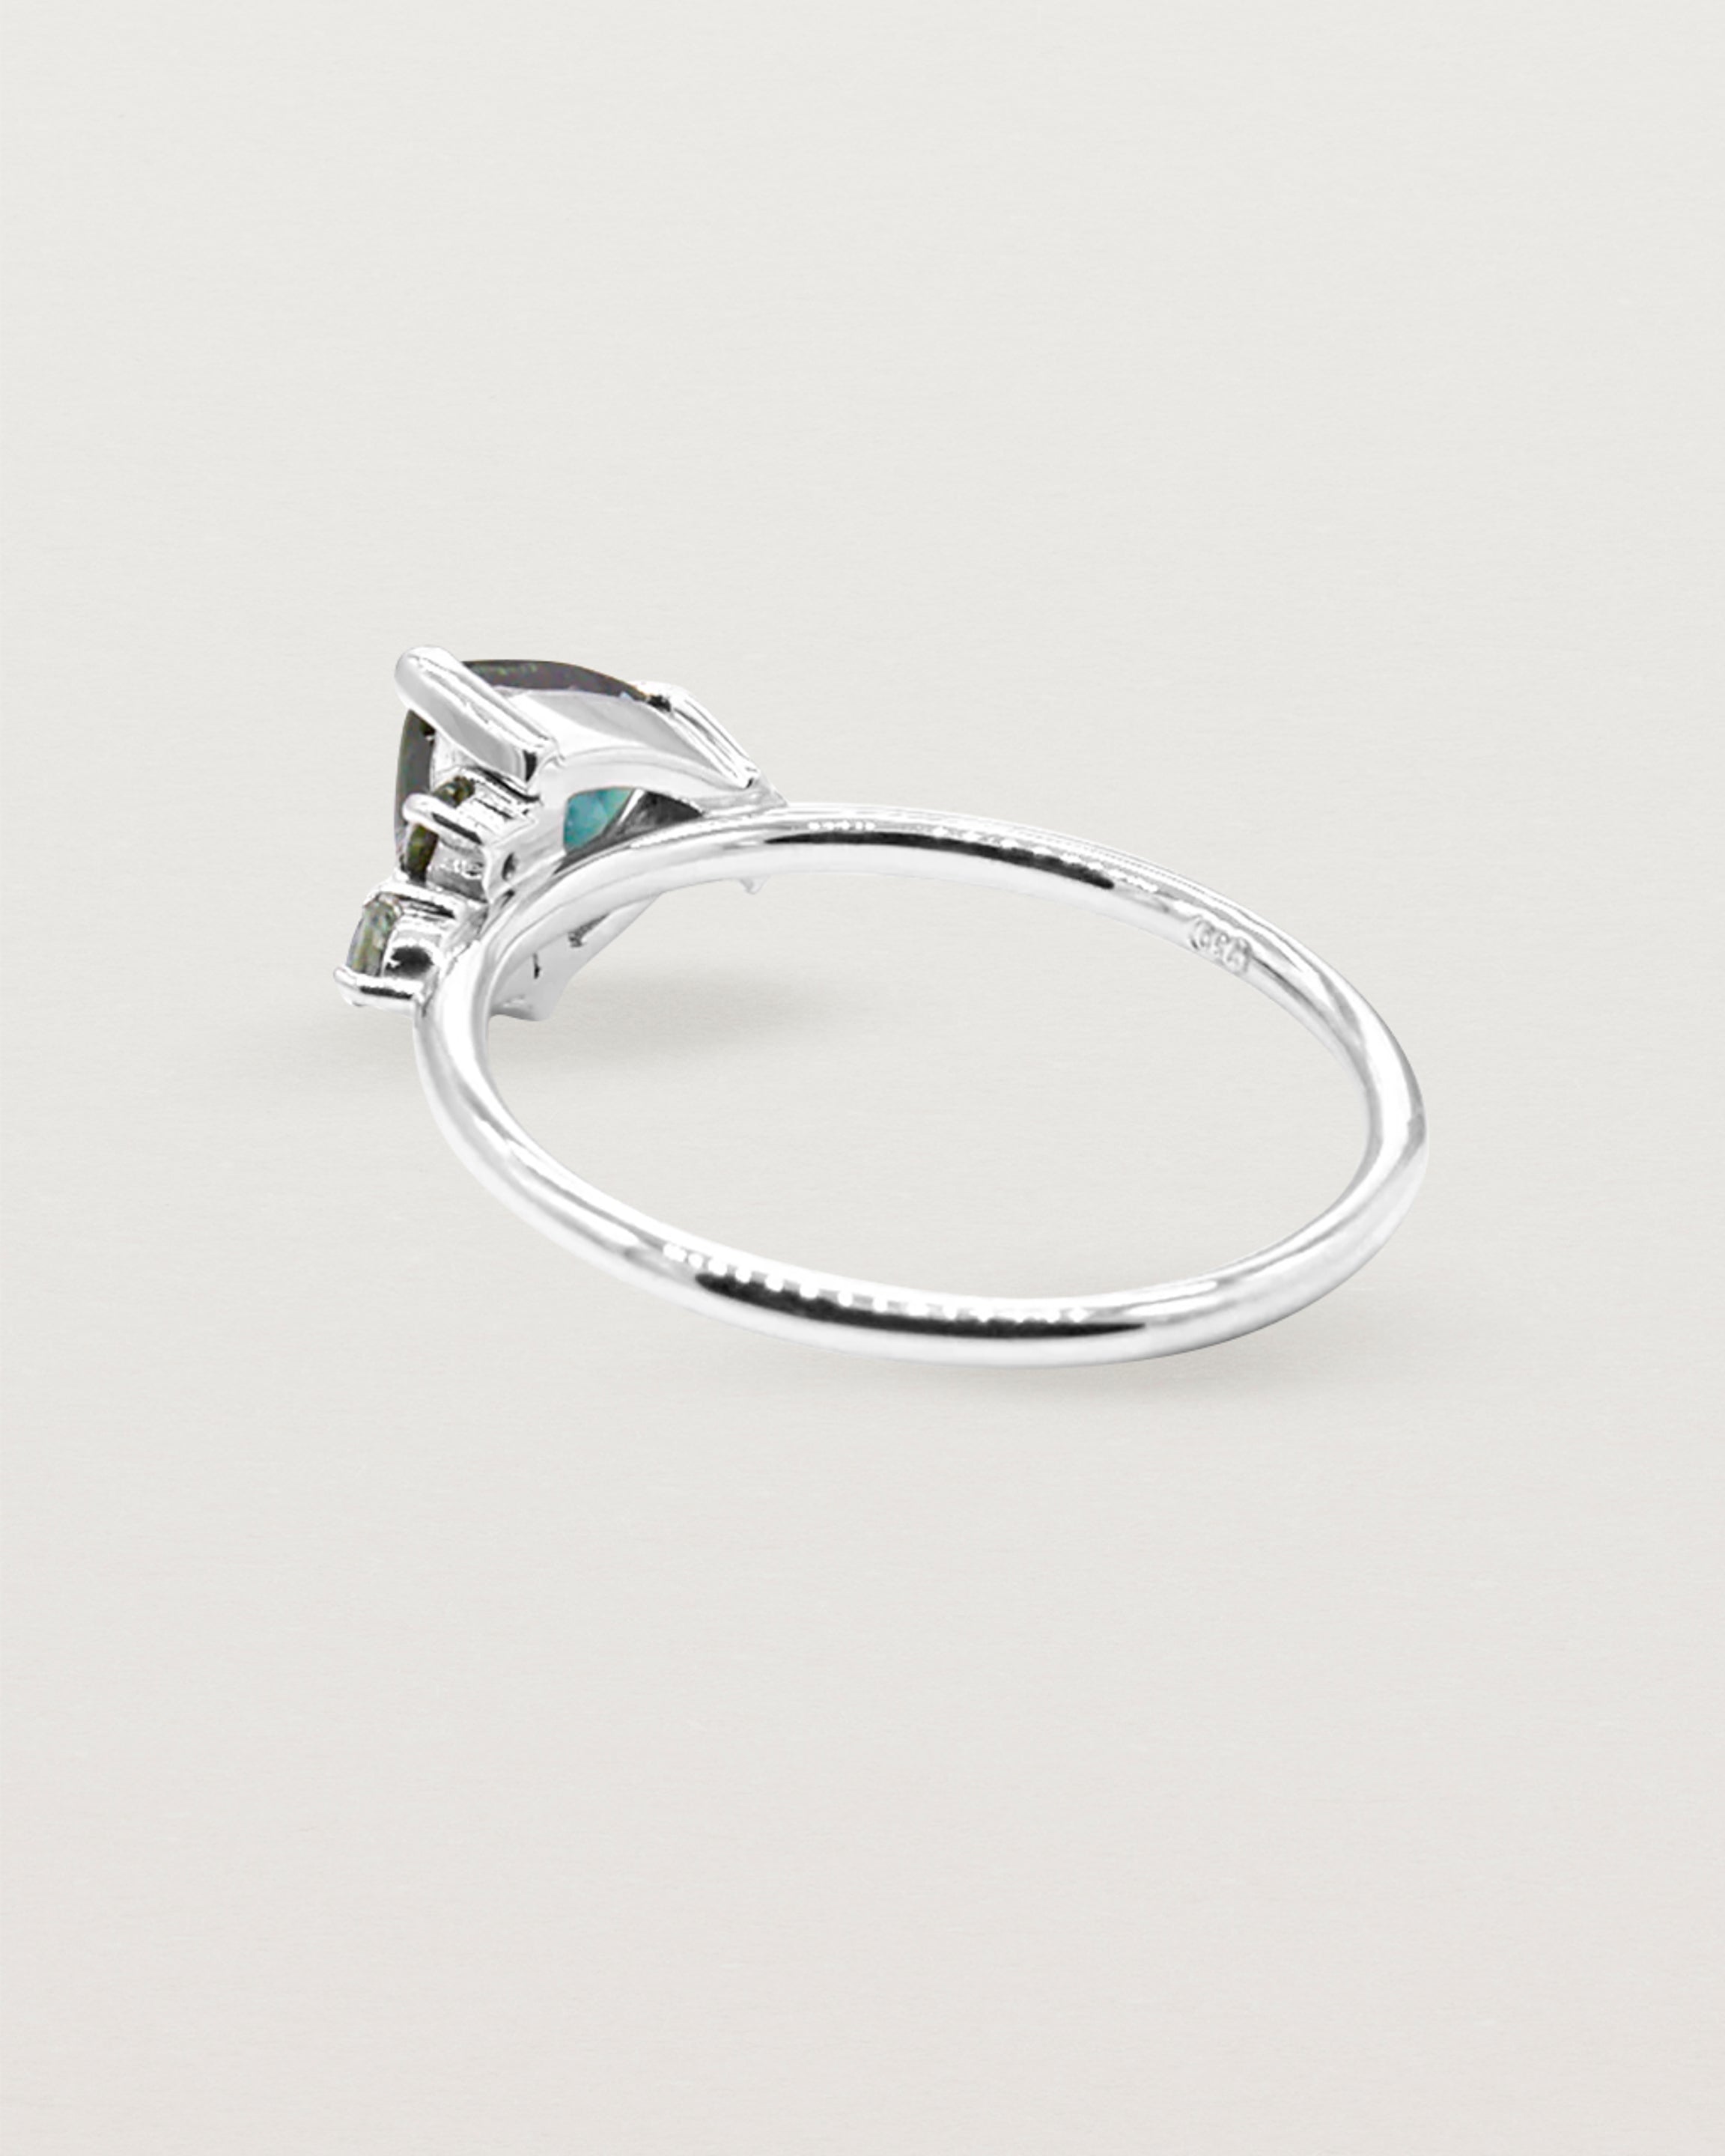 A distinctive cluster, featuring an iridescent trillion cut sapphire and crafted in white gold